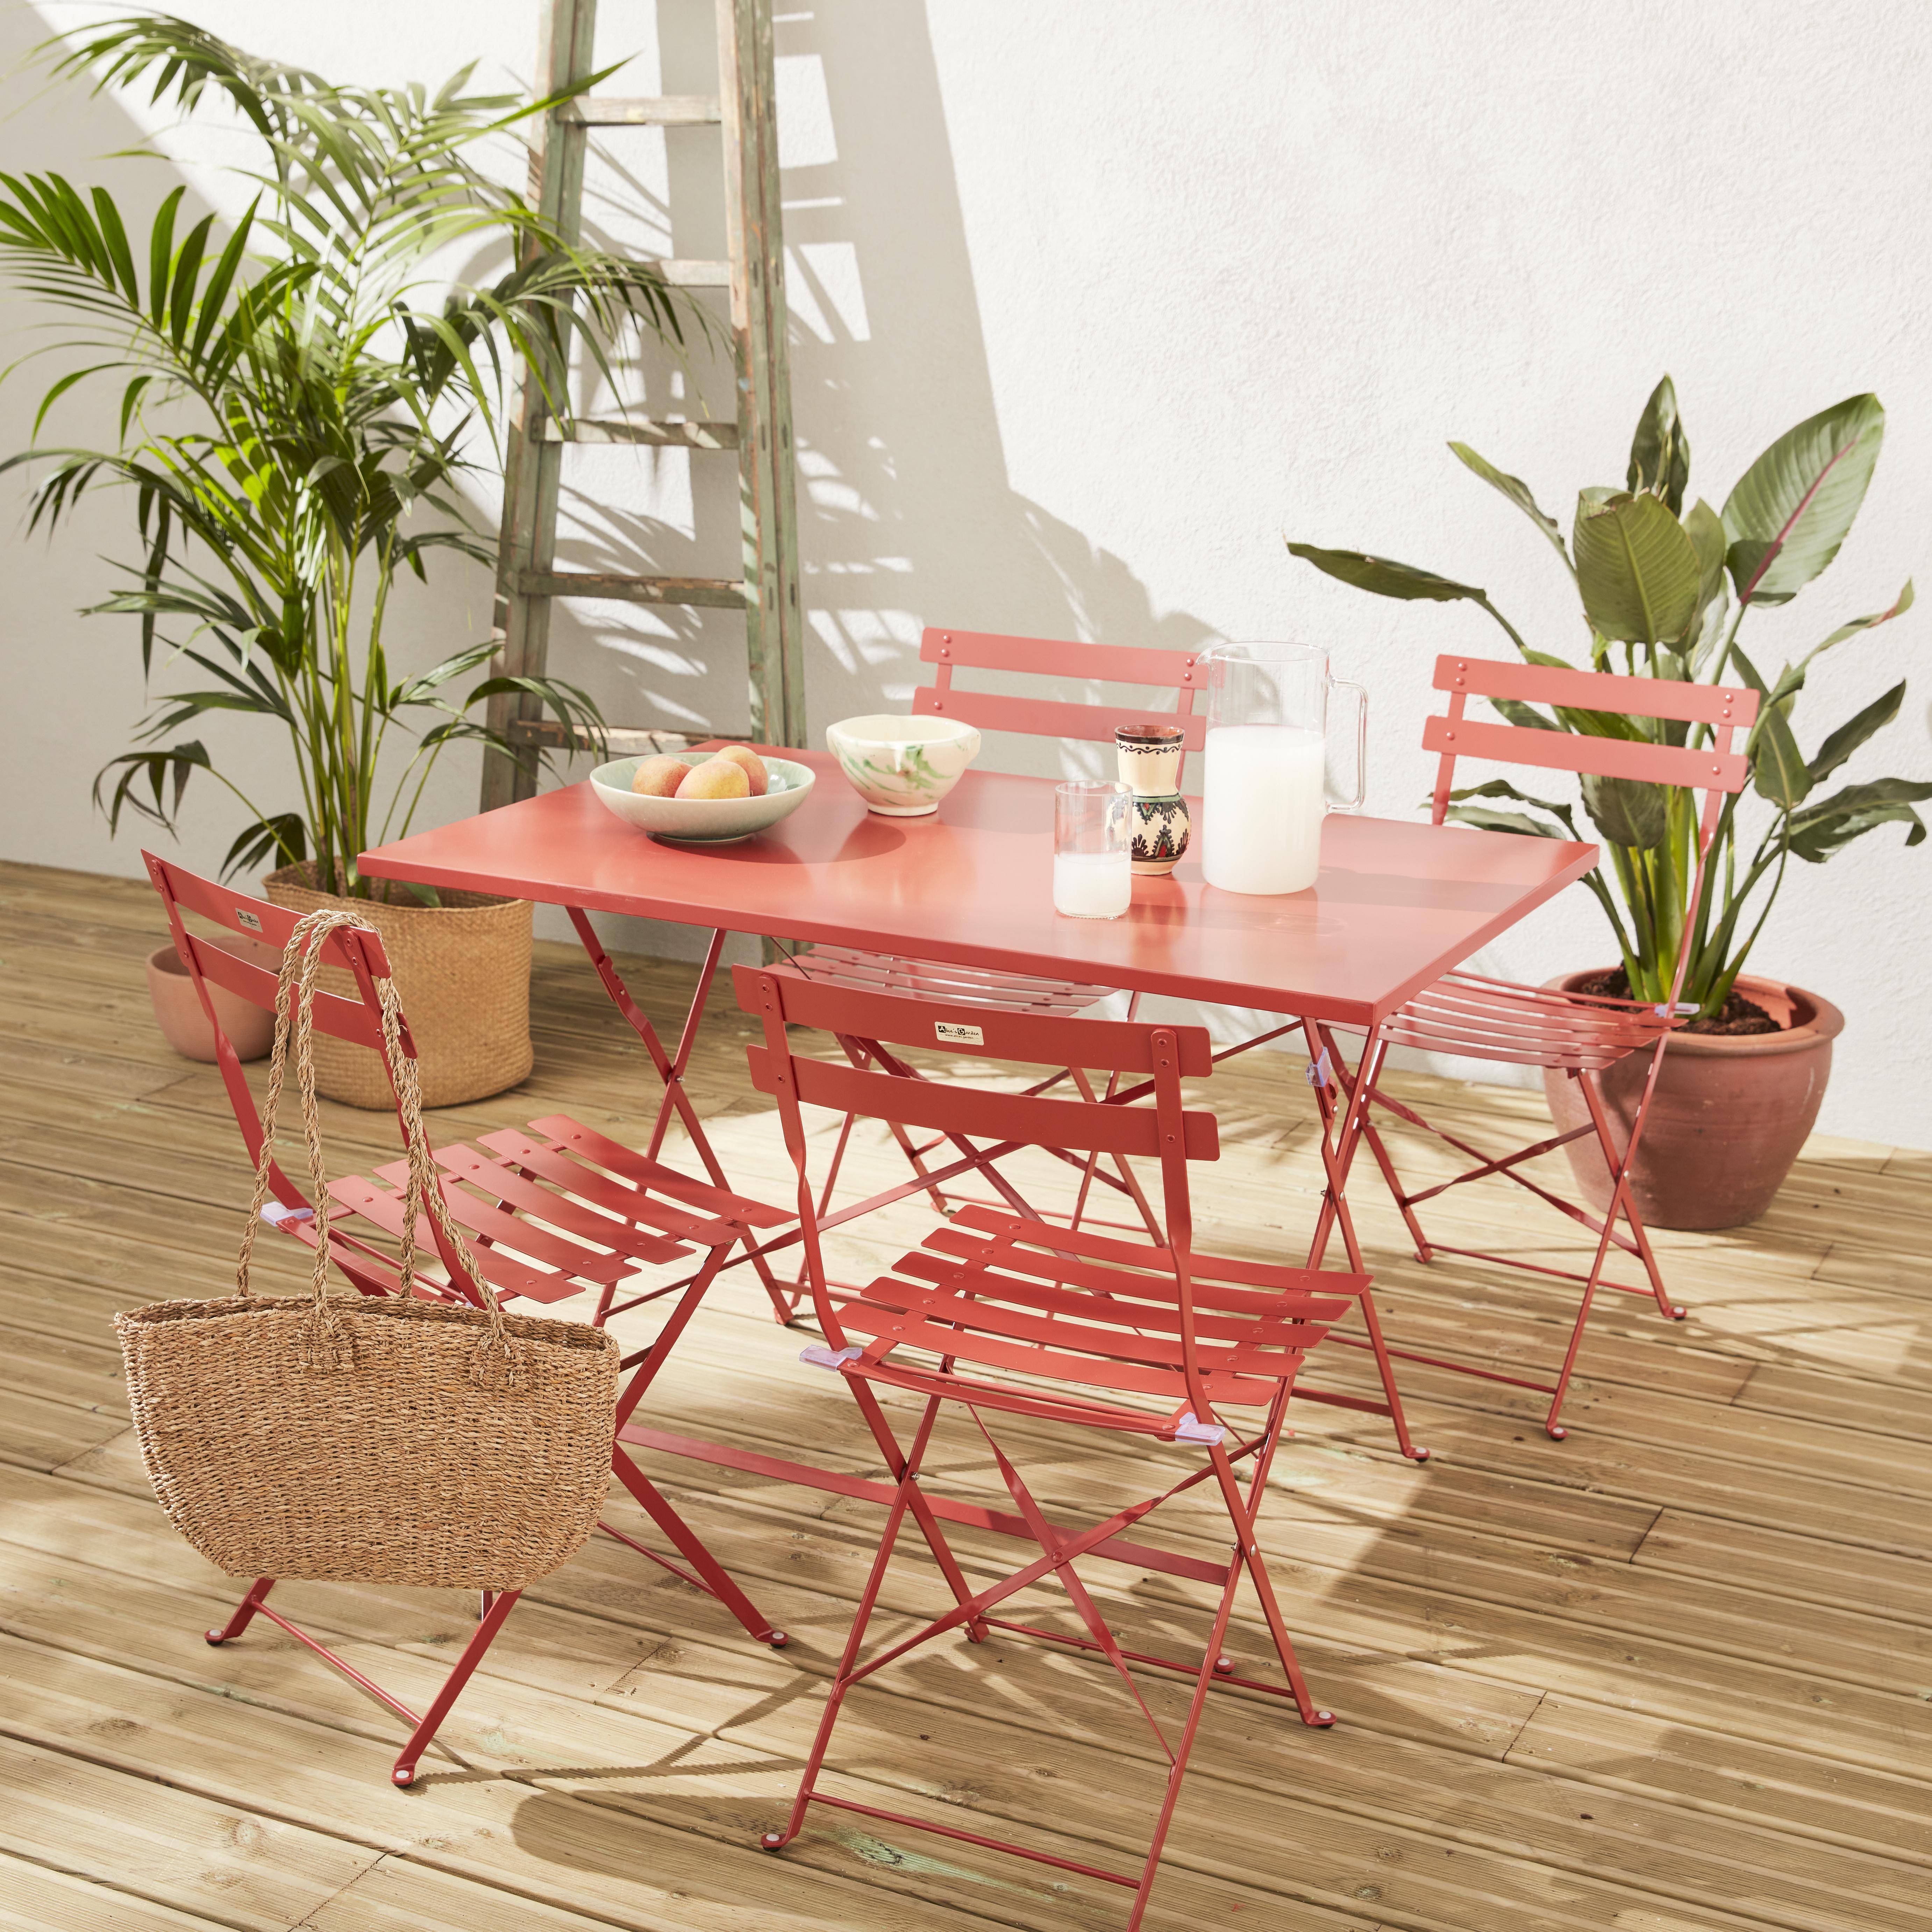 4-seater foldable thermo-lacquered steel bistro garden table with chairs, 110x70cm - Emilia - Terracotta Photo1